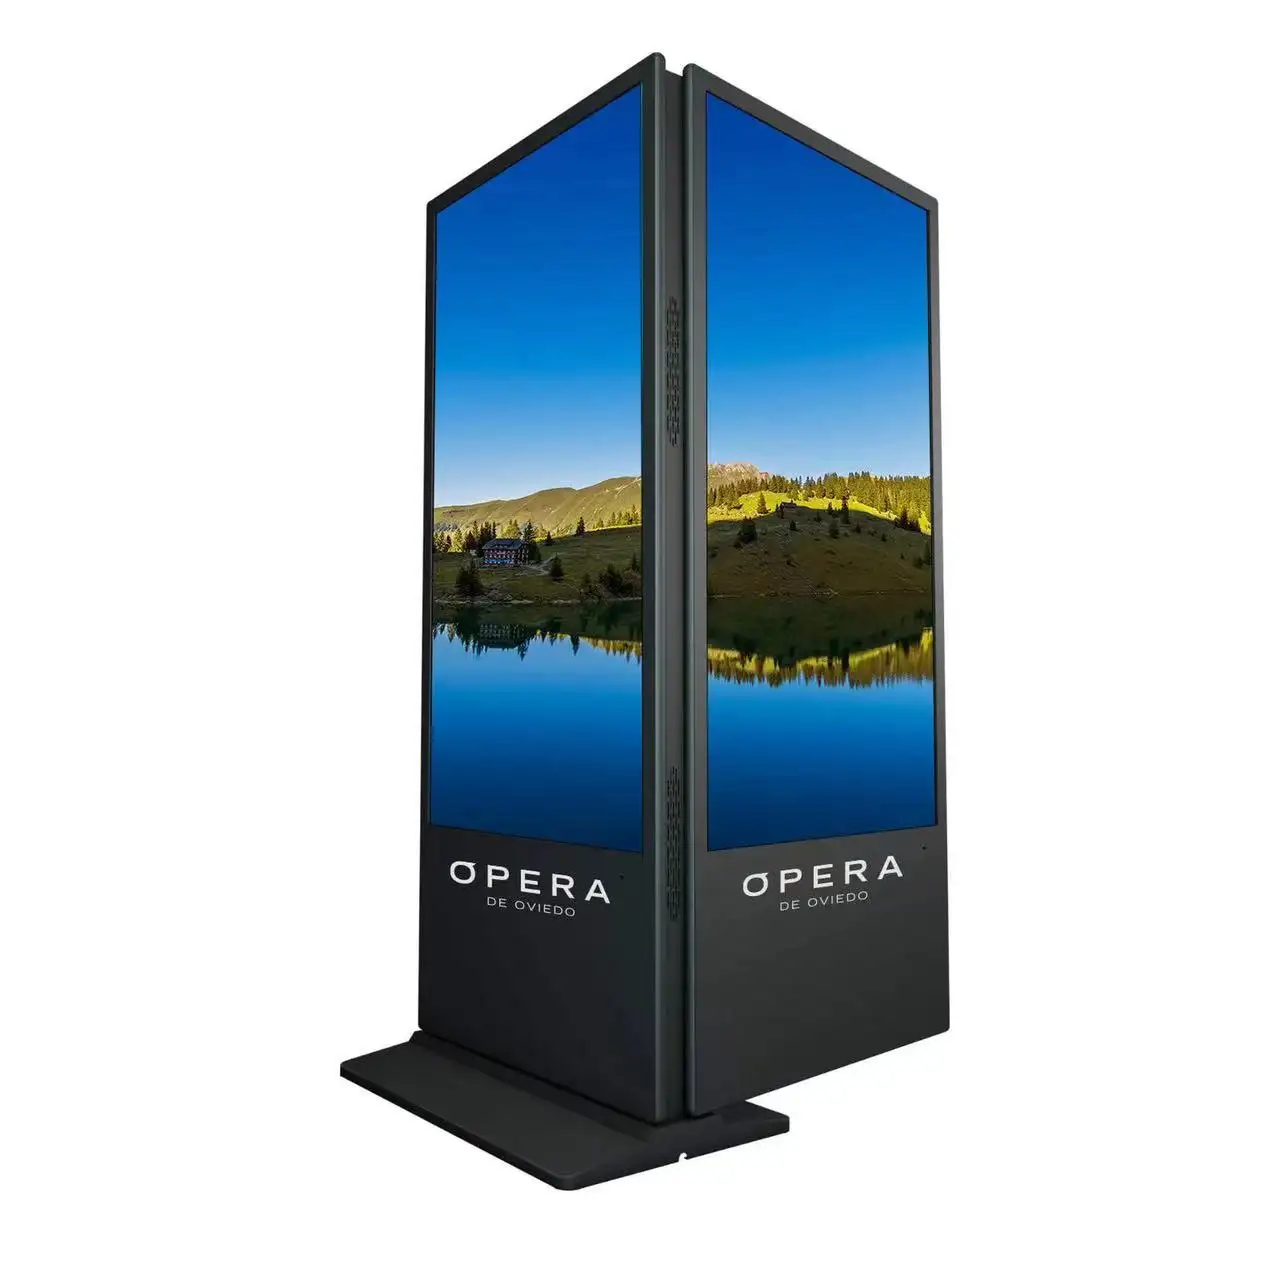 43 49 55 inch kiosk floor standing digital signage totem double-sided lcd indoor screen advertising video display player